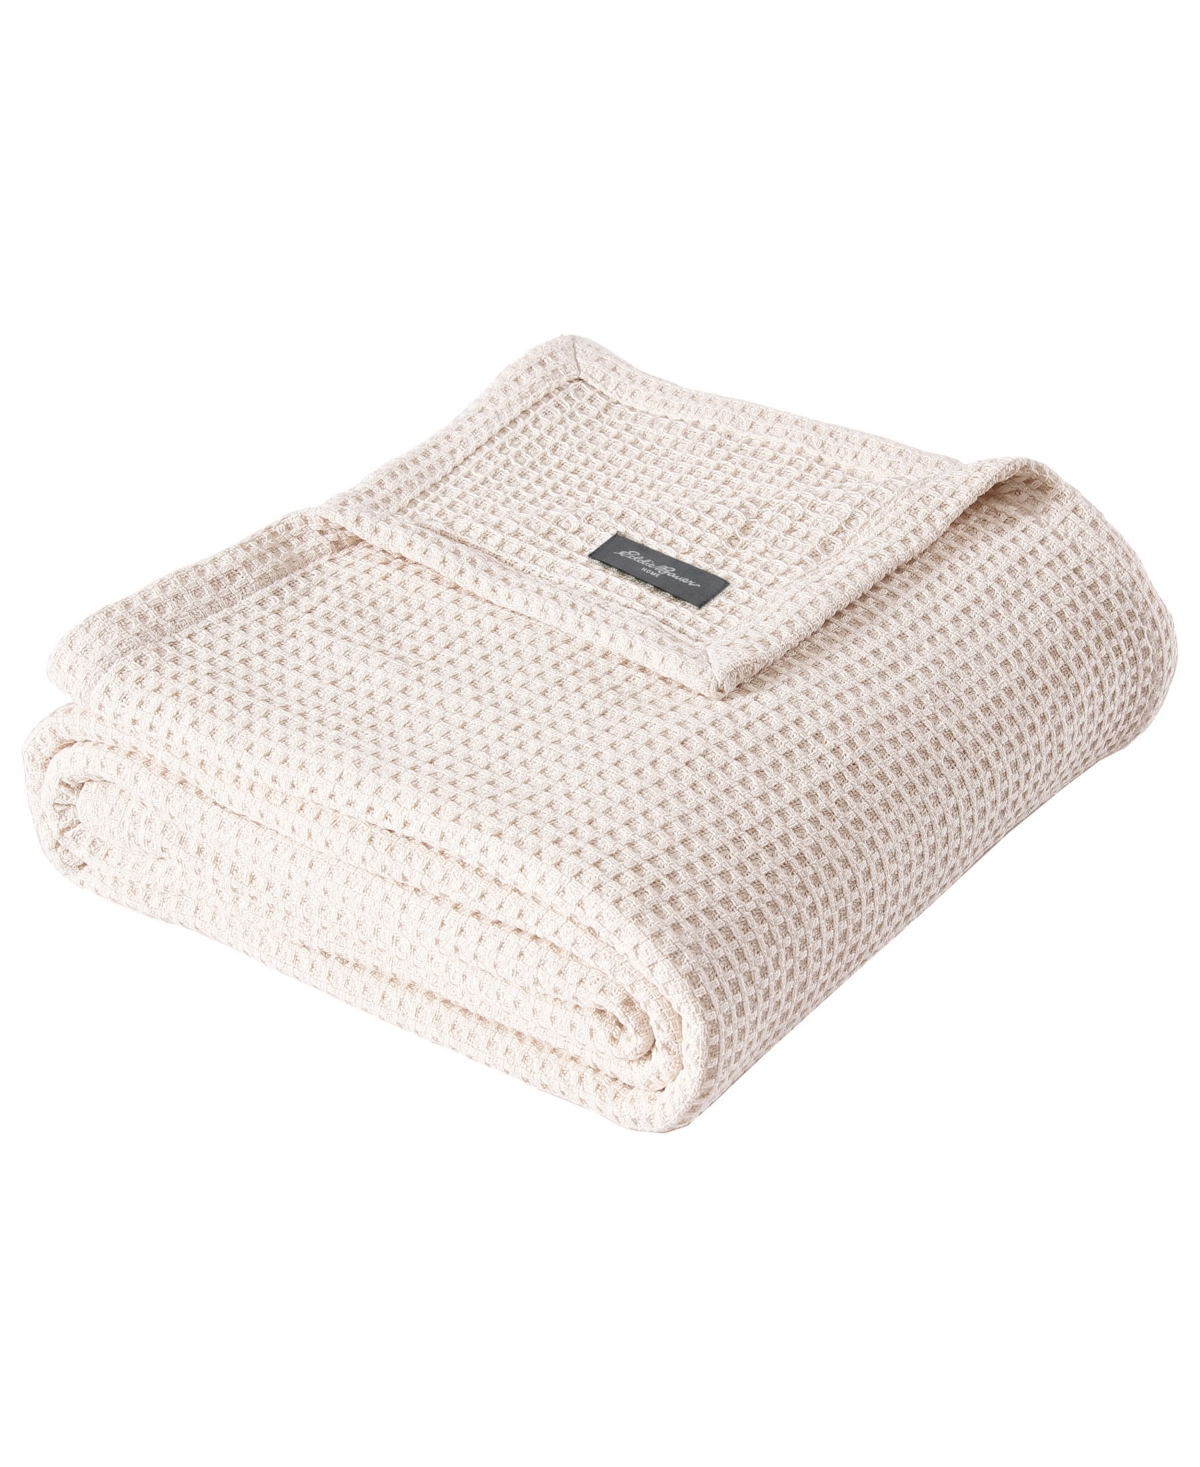 Eddie Bauer Solid Waffle Cotton Reversible Blanket, Twin In Winter Ivory White